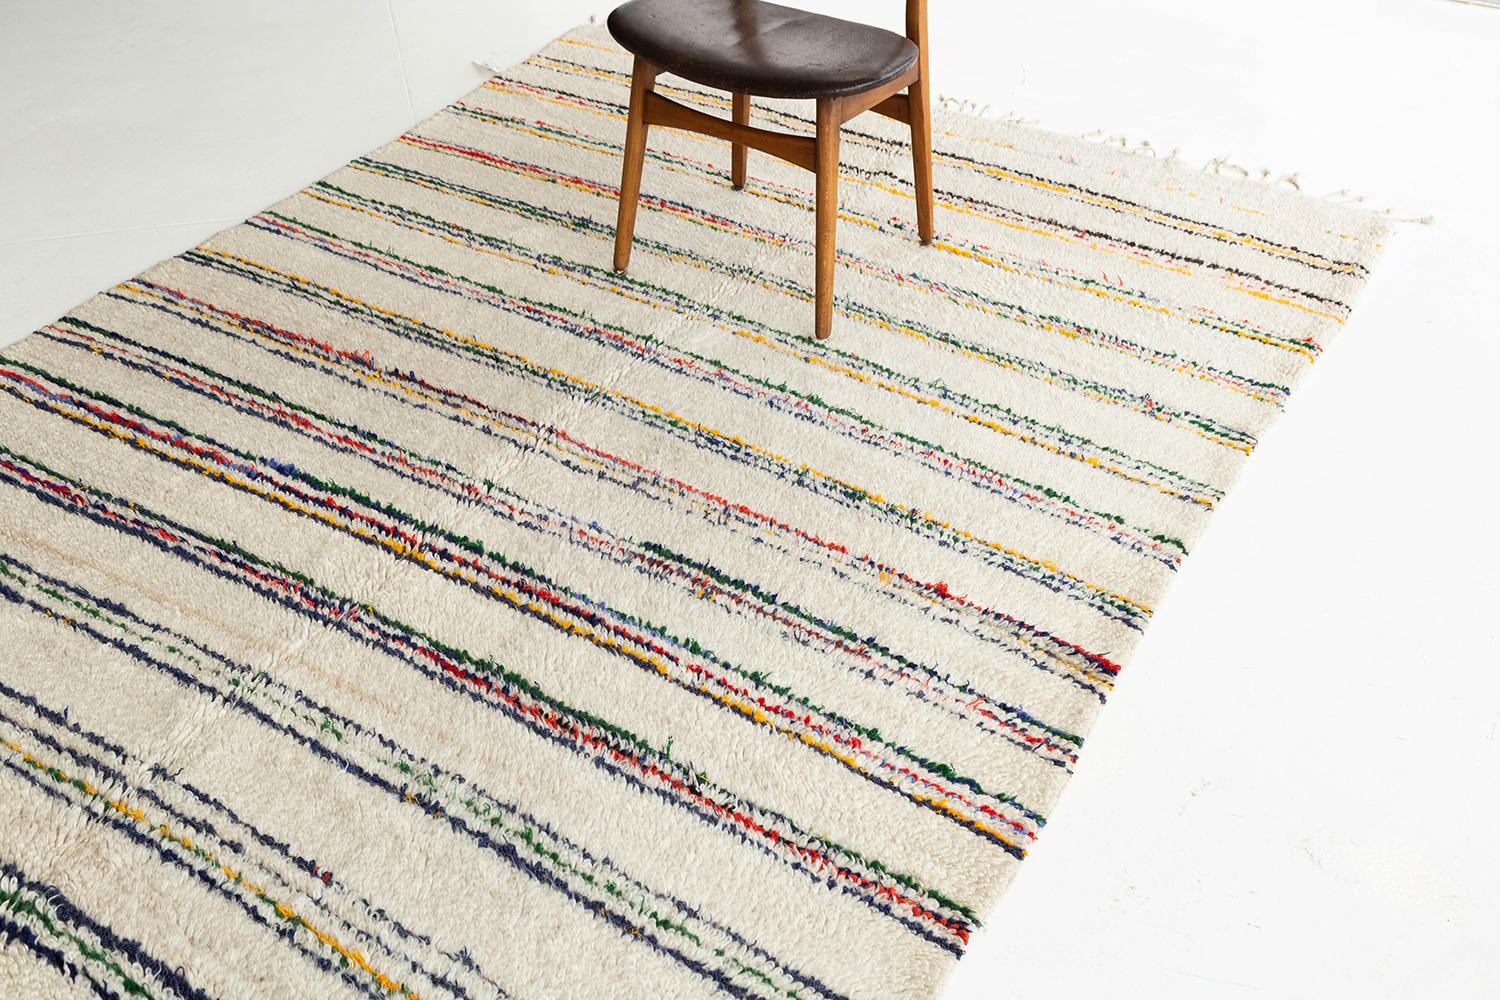 A charming vintage Moroccan rug made by the Azilal tribe of Morocco. Beautiful multicolored stripes atop an ivory pile weave make for the perfect contemporary piece. Azilal rugs originating from the high Atlas mountains contain much symbolism and